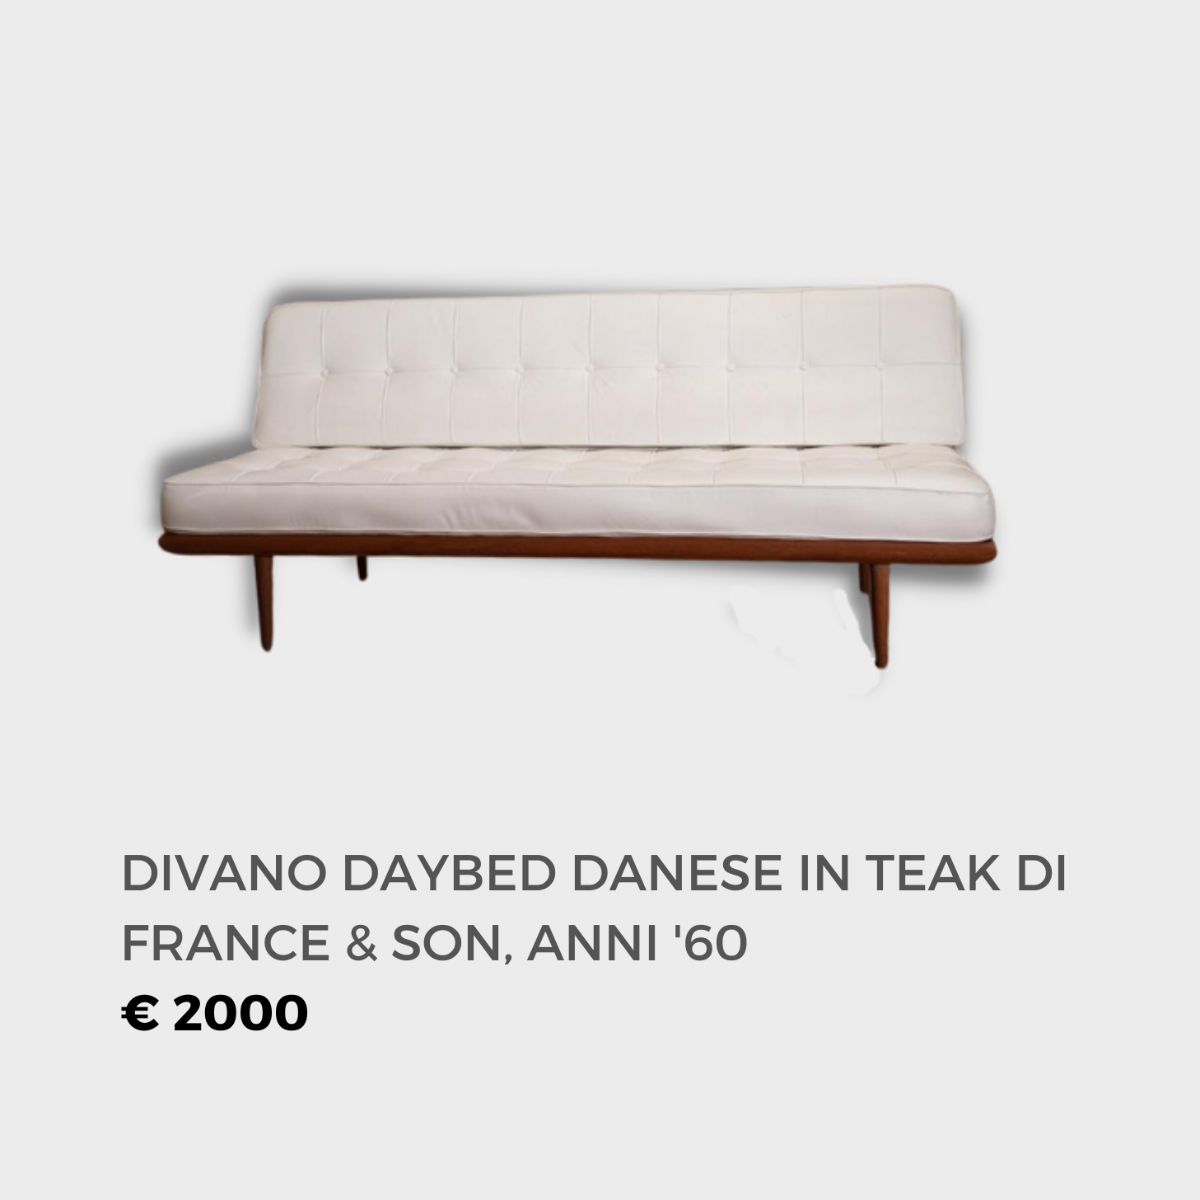 DIVANO DAYBED DANESE FRANCE & SON ANNI '60 IN TEAK